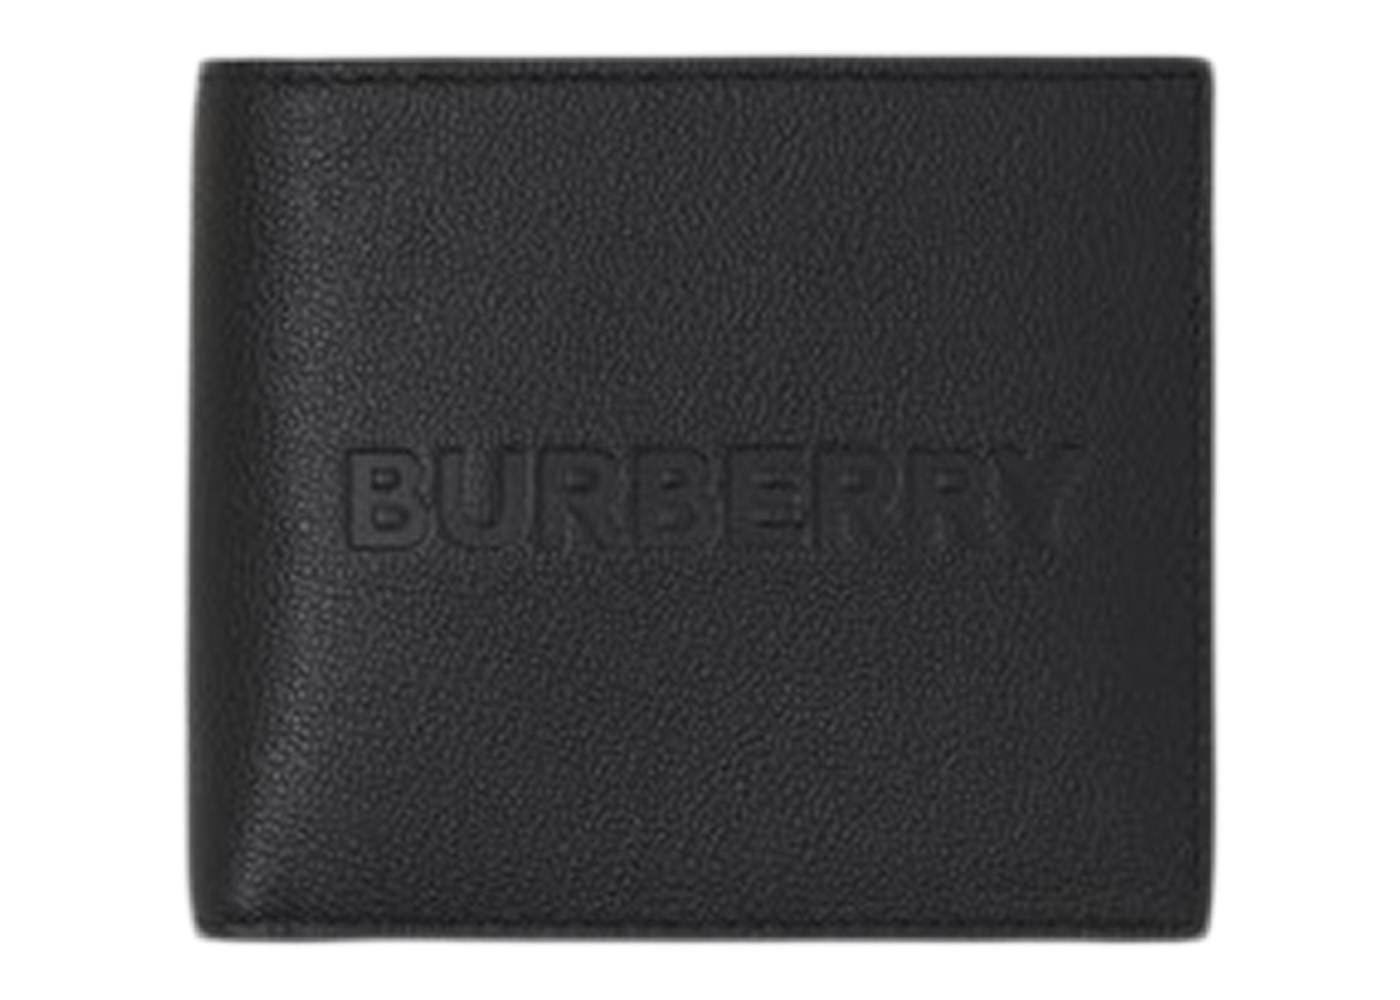 Burberry Embossed Leather Bifold Wallet Black in Calfskin Leather 